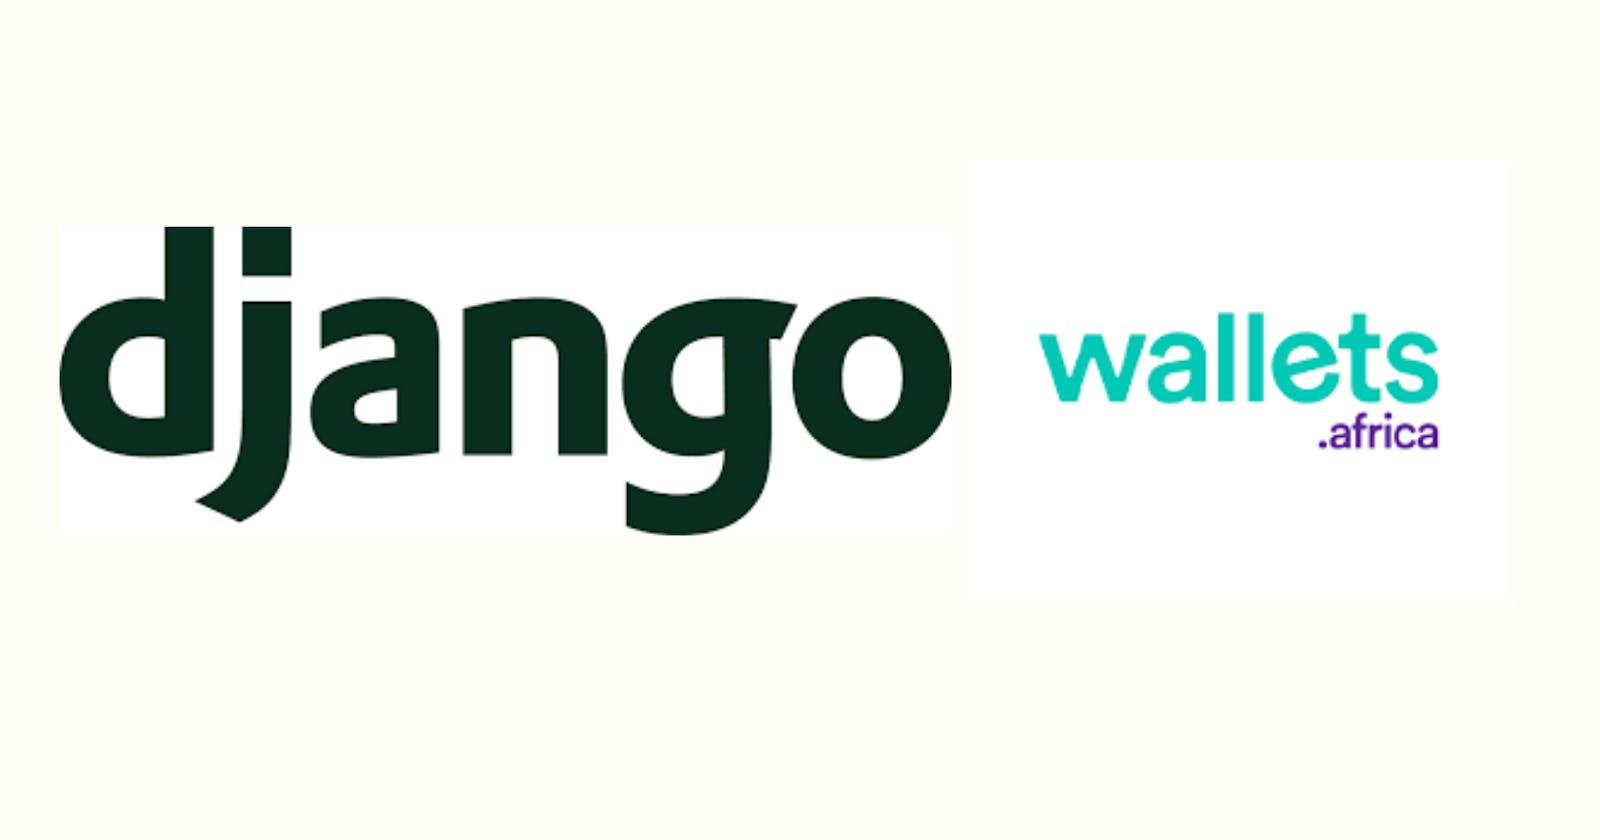 Building a Wallet System with Django and Wallets Africa API